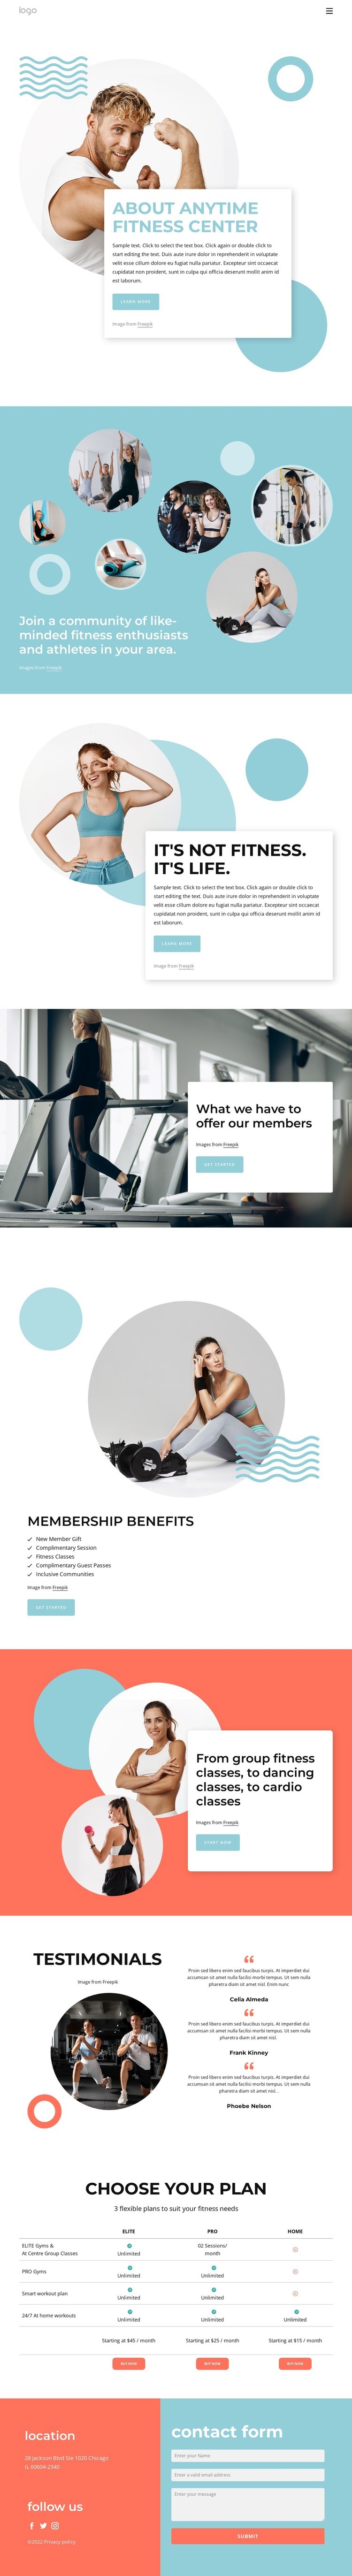 About Anytime fitness center Web Page Design